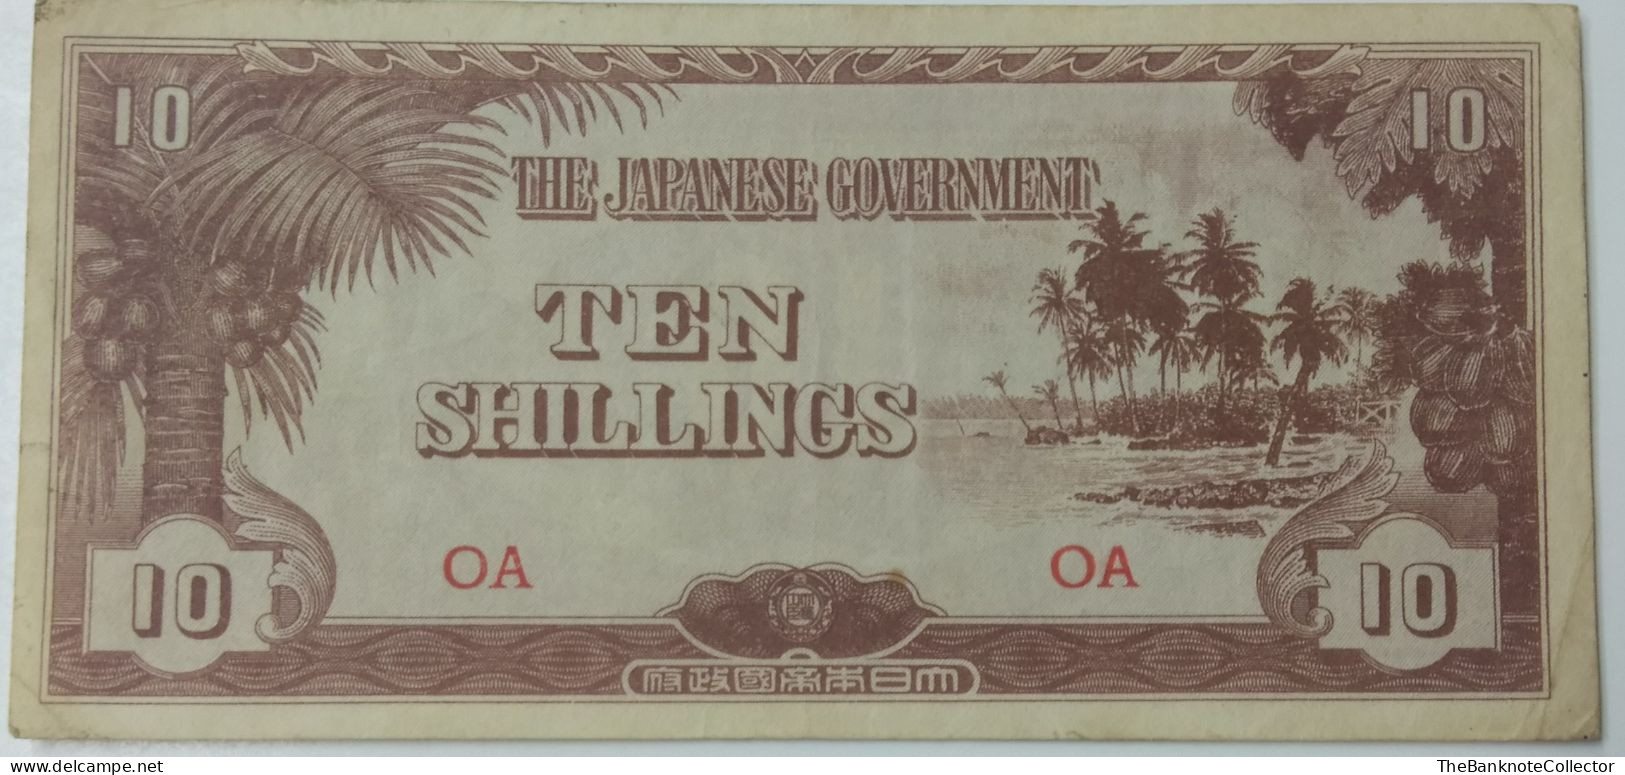 Japan Government Occupation JIM Oceania 10 Shillings WWII ND 1942 P-3  VF+ - Giappone